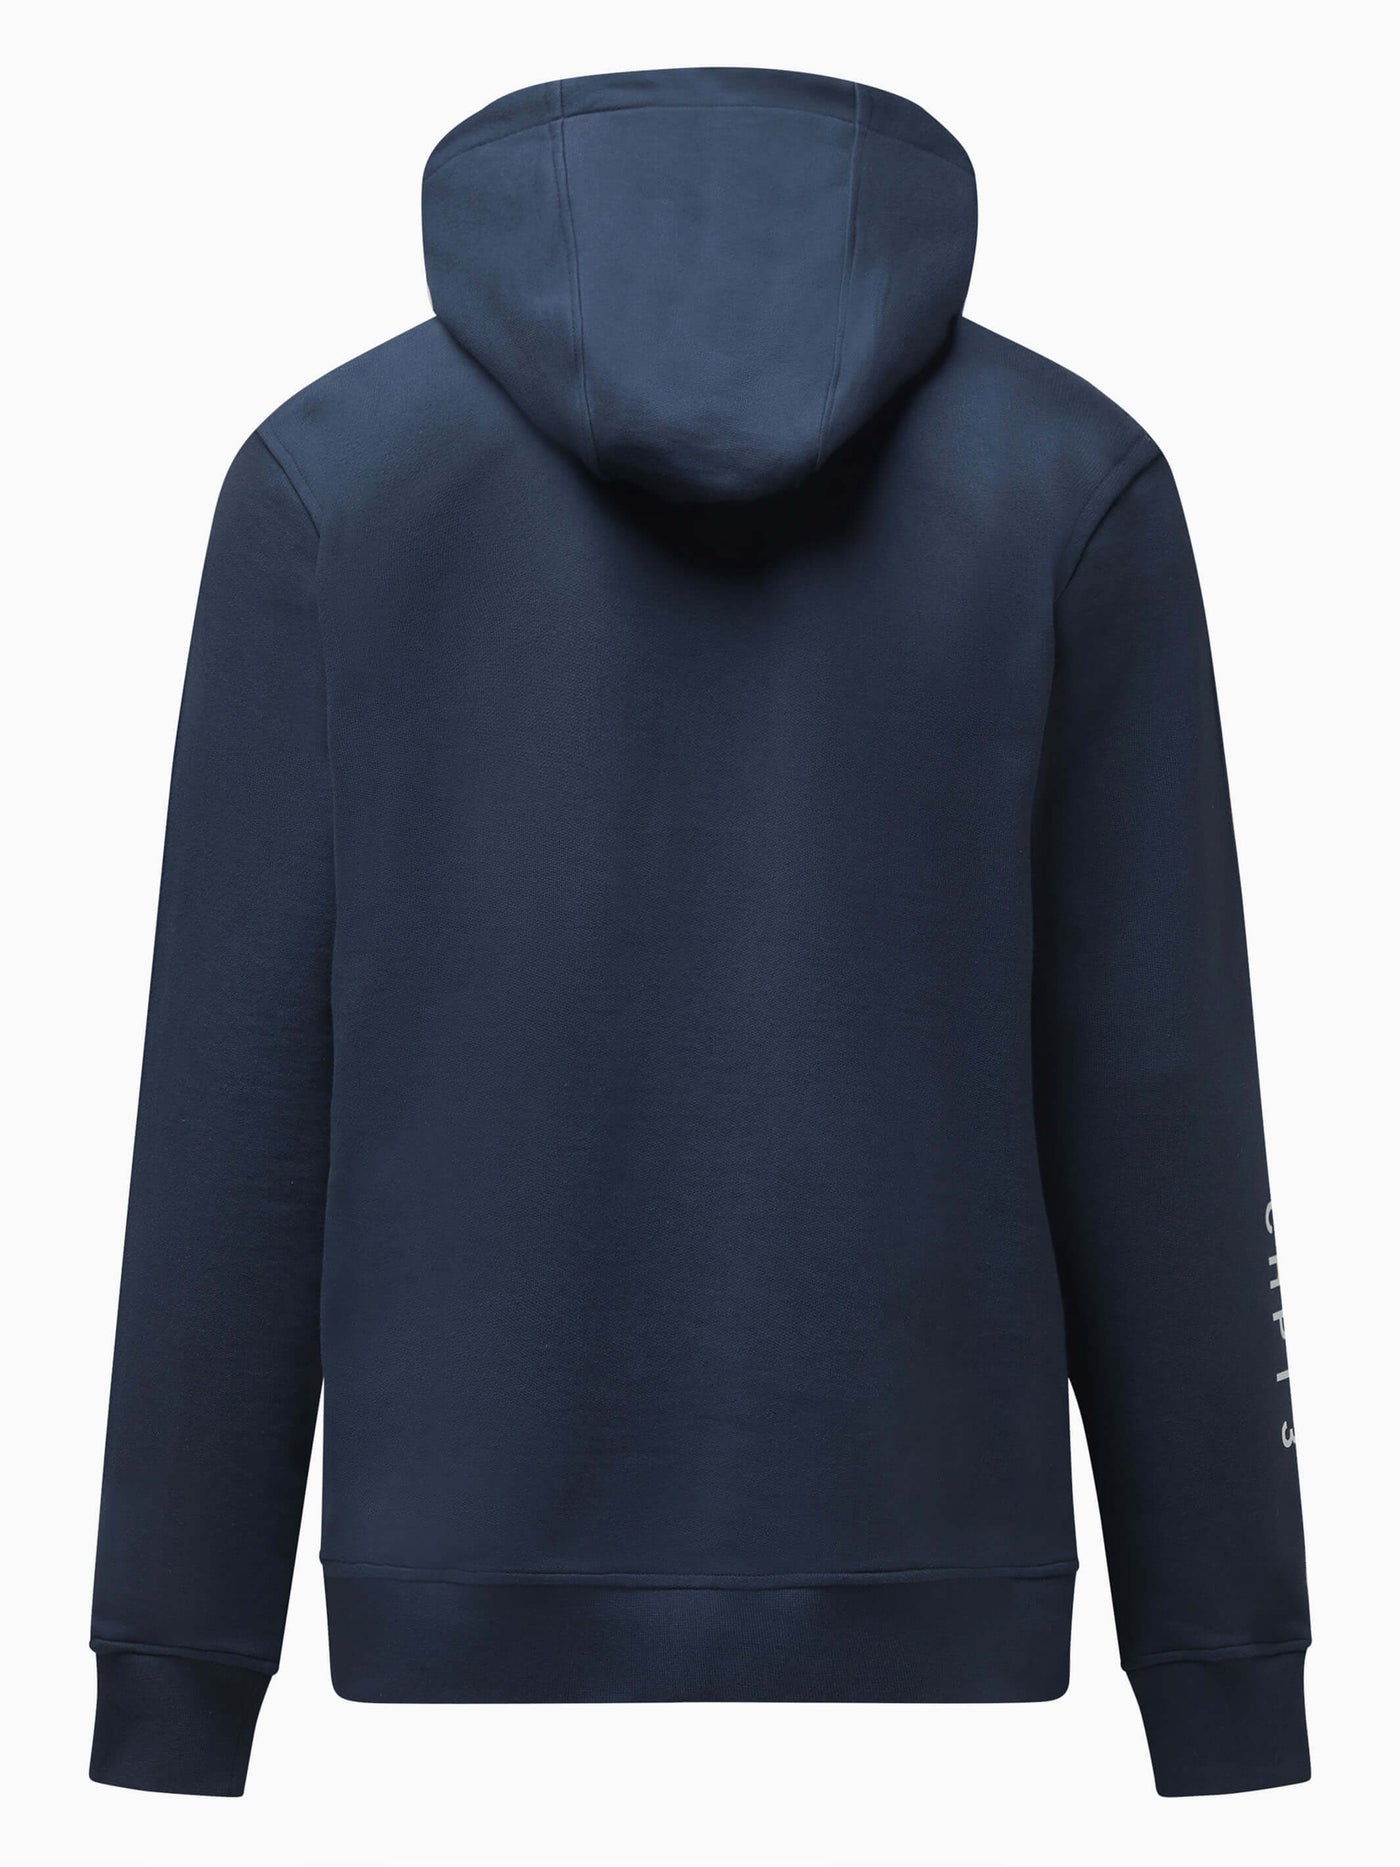 Photo of CHPT3 Elysée Cotton zip hoodie, in Outer Space Navy blue, viewed from the back